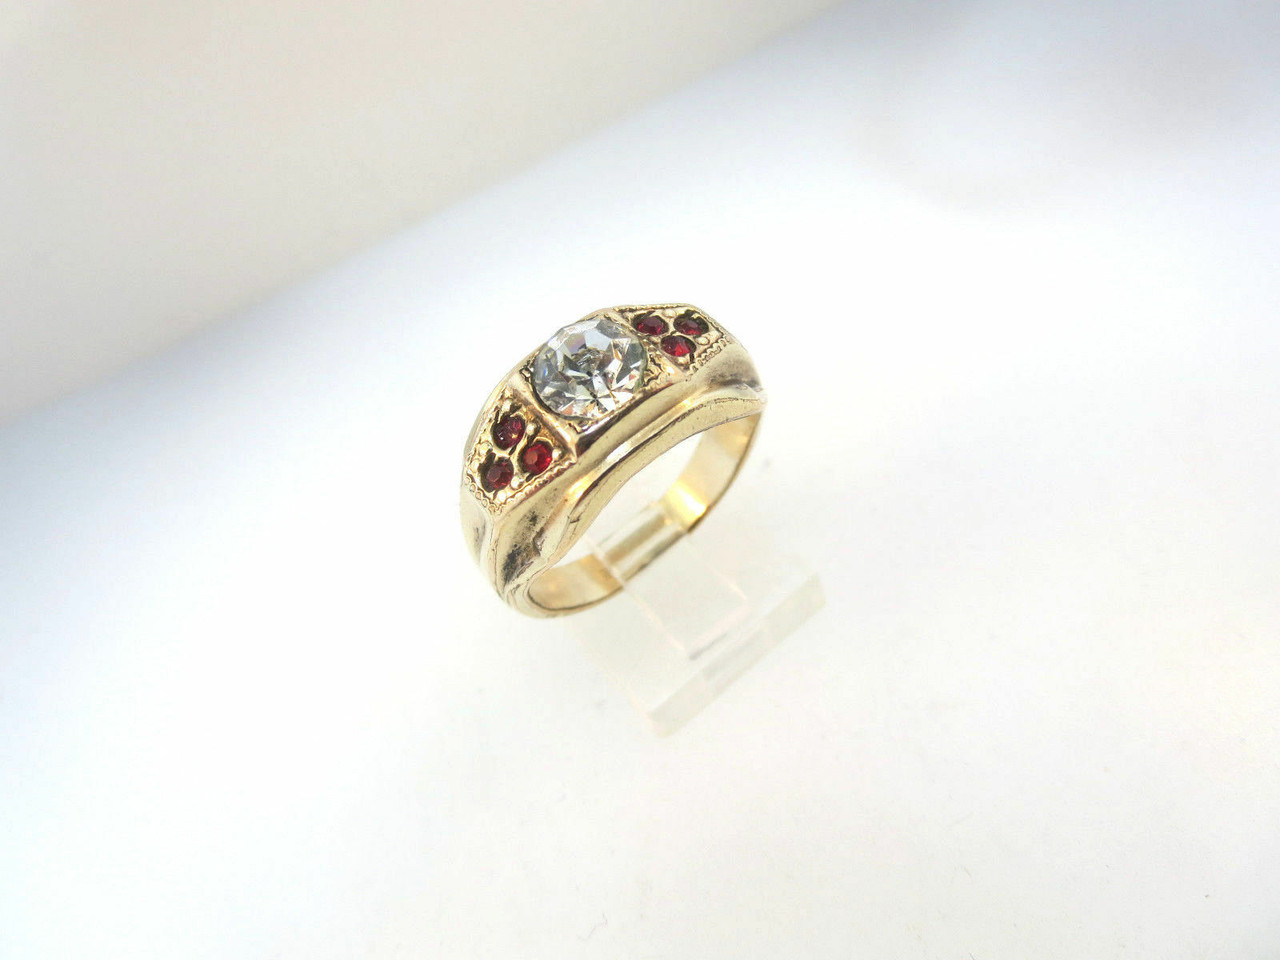 Vintage 12k Gold Filled Clear and Red Rhinestones Unisex Ring Size 8.75